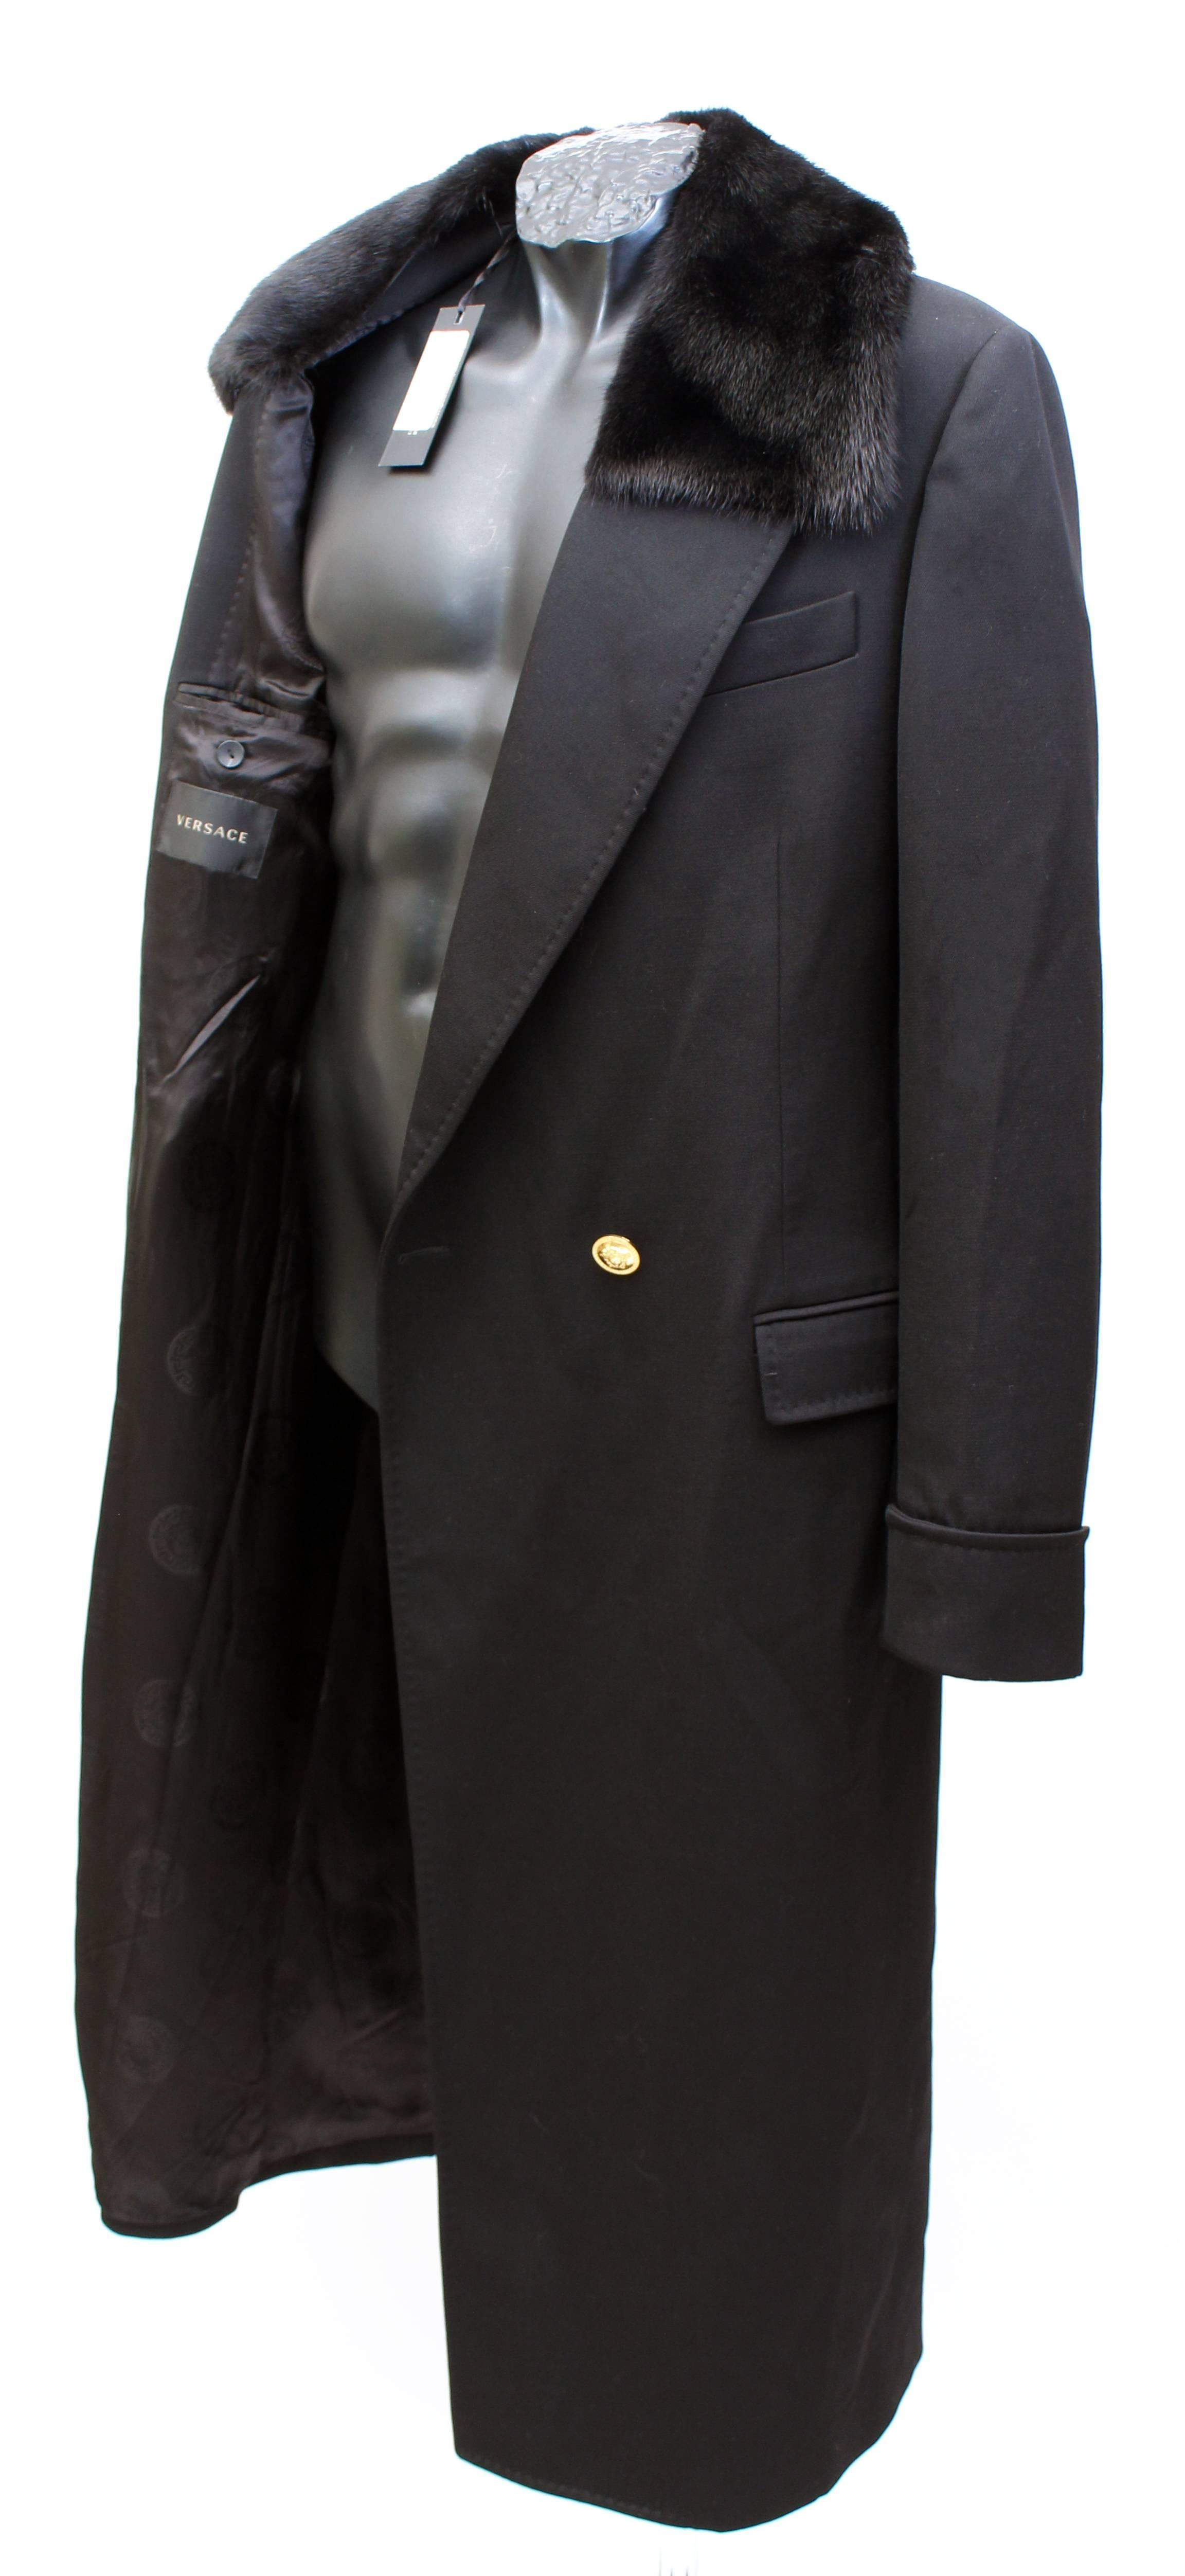 VERSACE COAT FOR MEN

100% Wool

Mink

Fully lined

Gold tone Medusa buttons

Very comfortable and extremely luxurious! 

Italian size 50, US 40

Brand new, with tags.